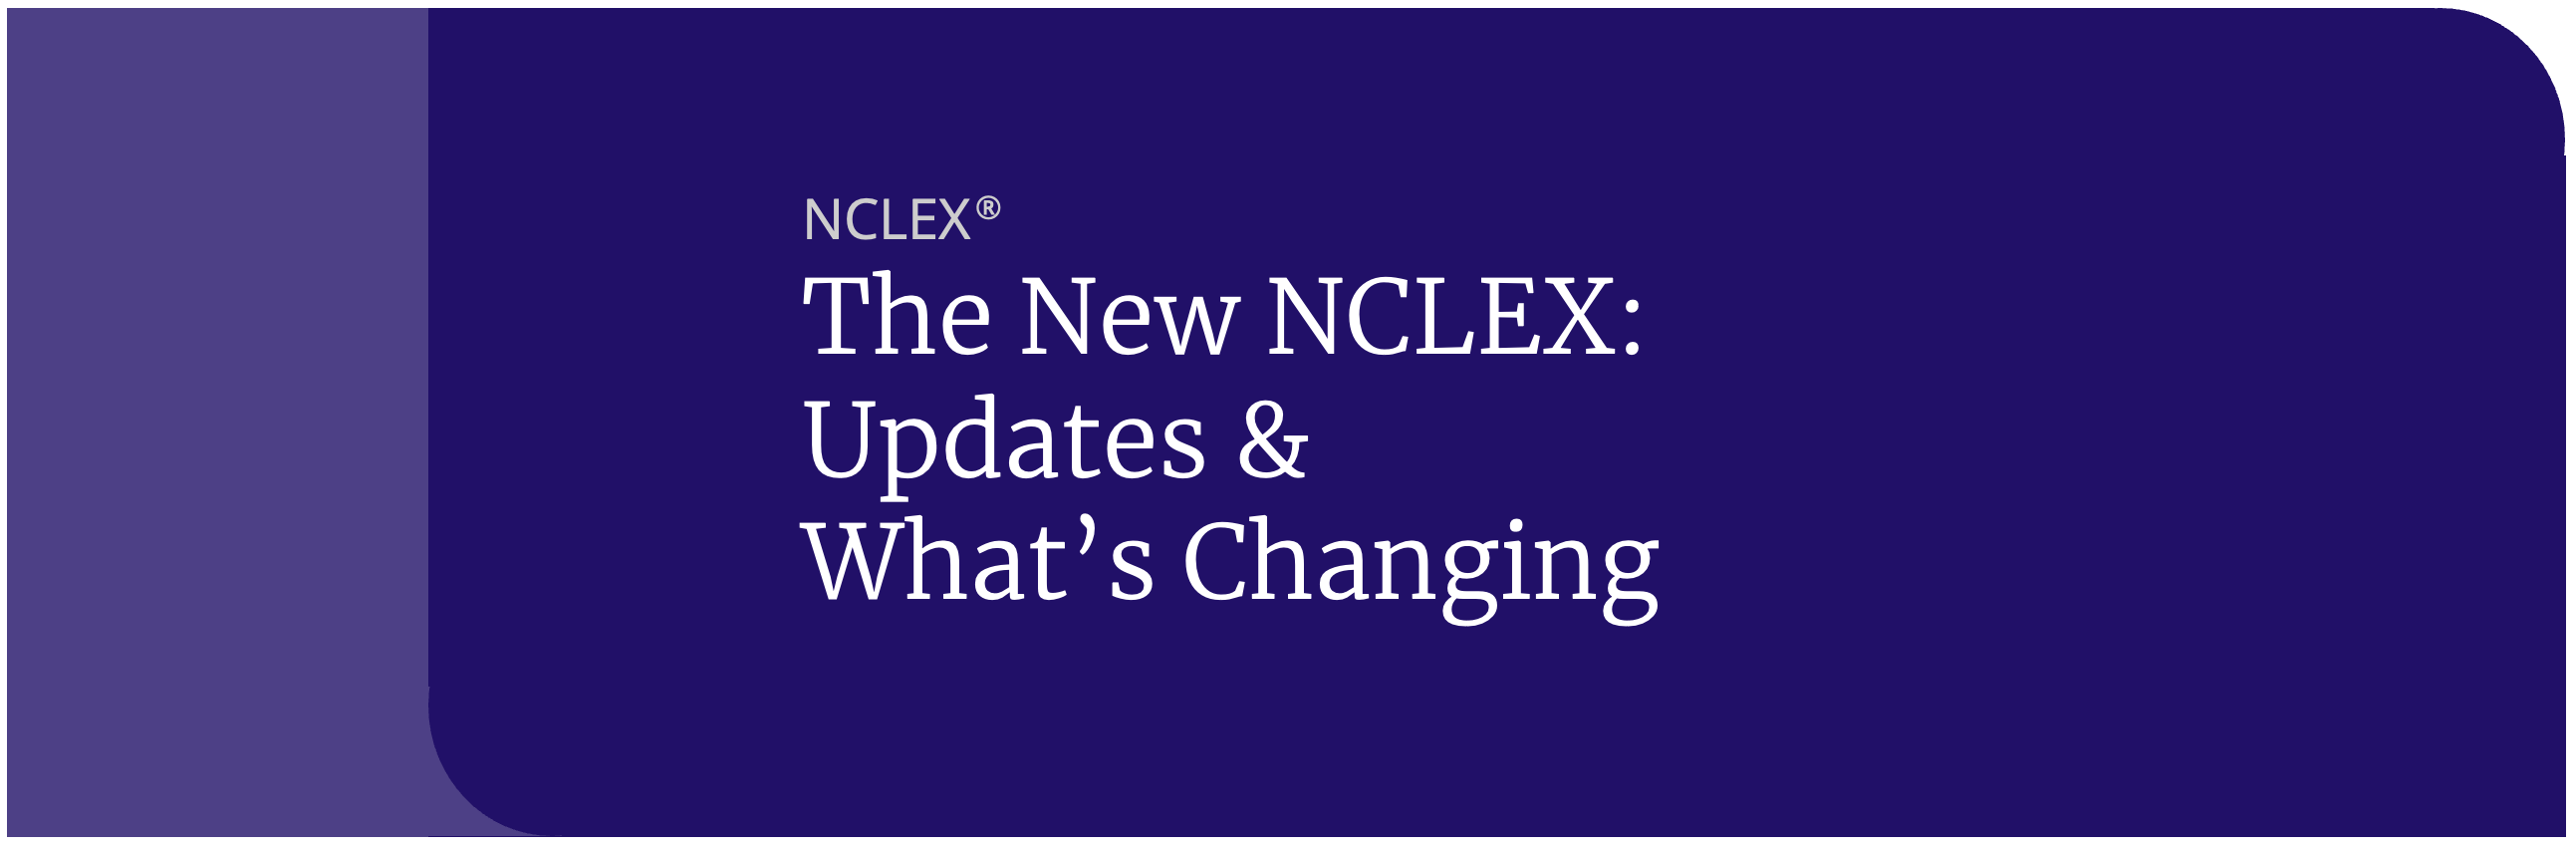 Next Generation NCLEX-RN (NGN) 2023 - all you need to know 